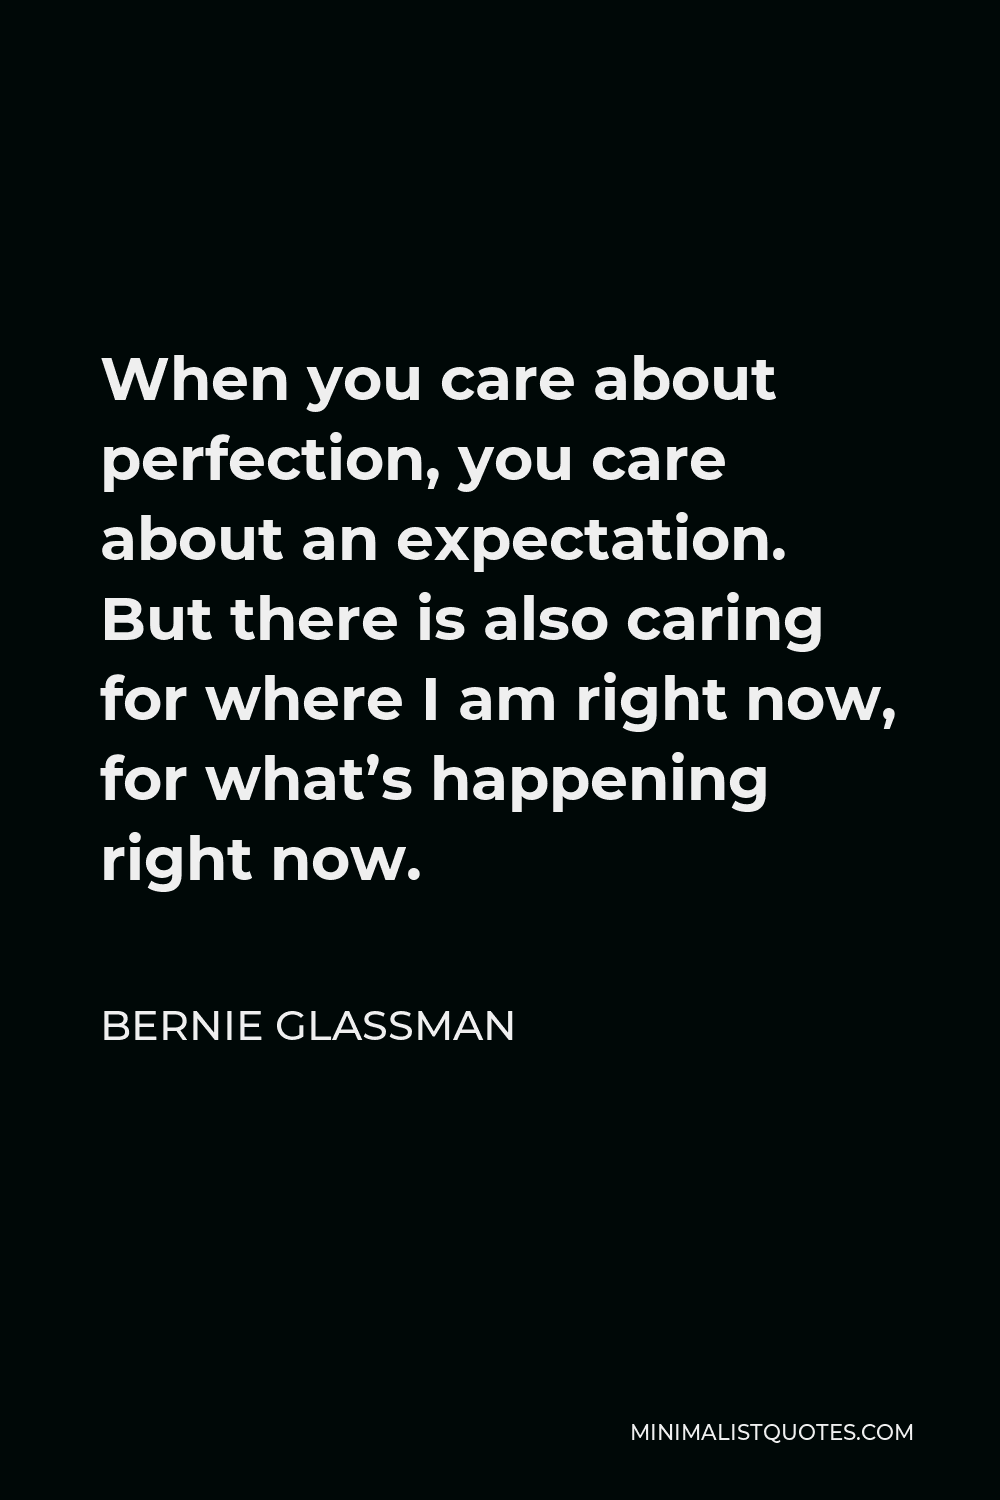 Bernie Glassman Quote - When you care about perfection, you care about an expectation. But there is also caring for where I am right now, for what’s happening right now.